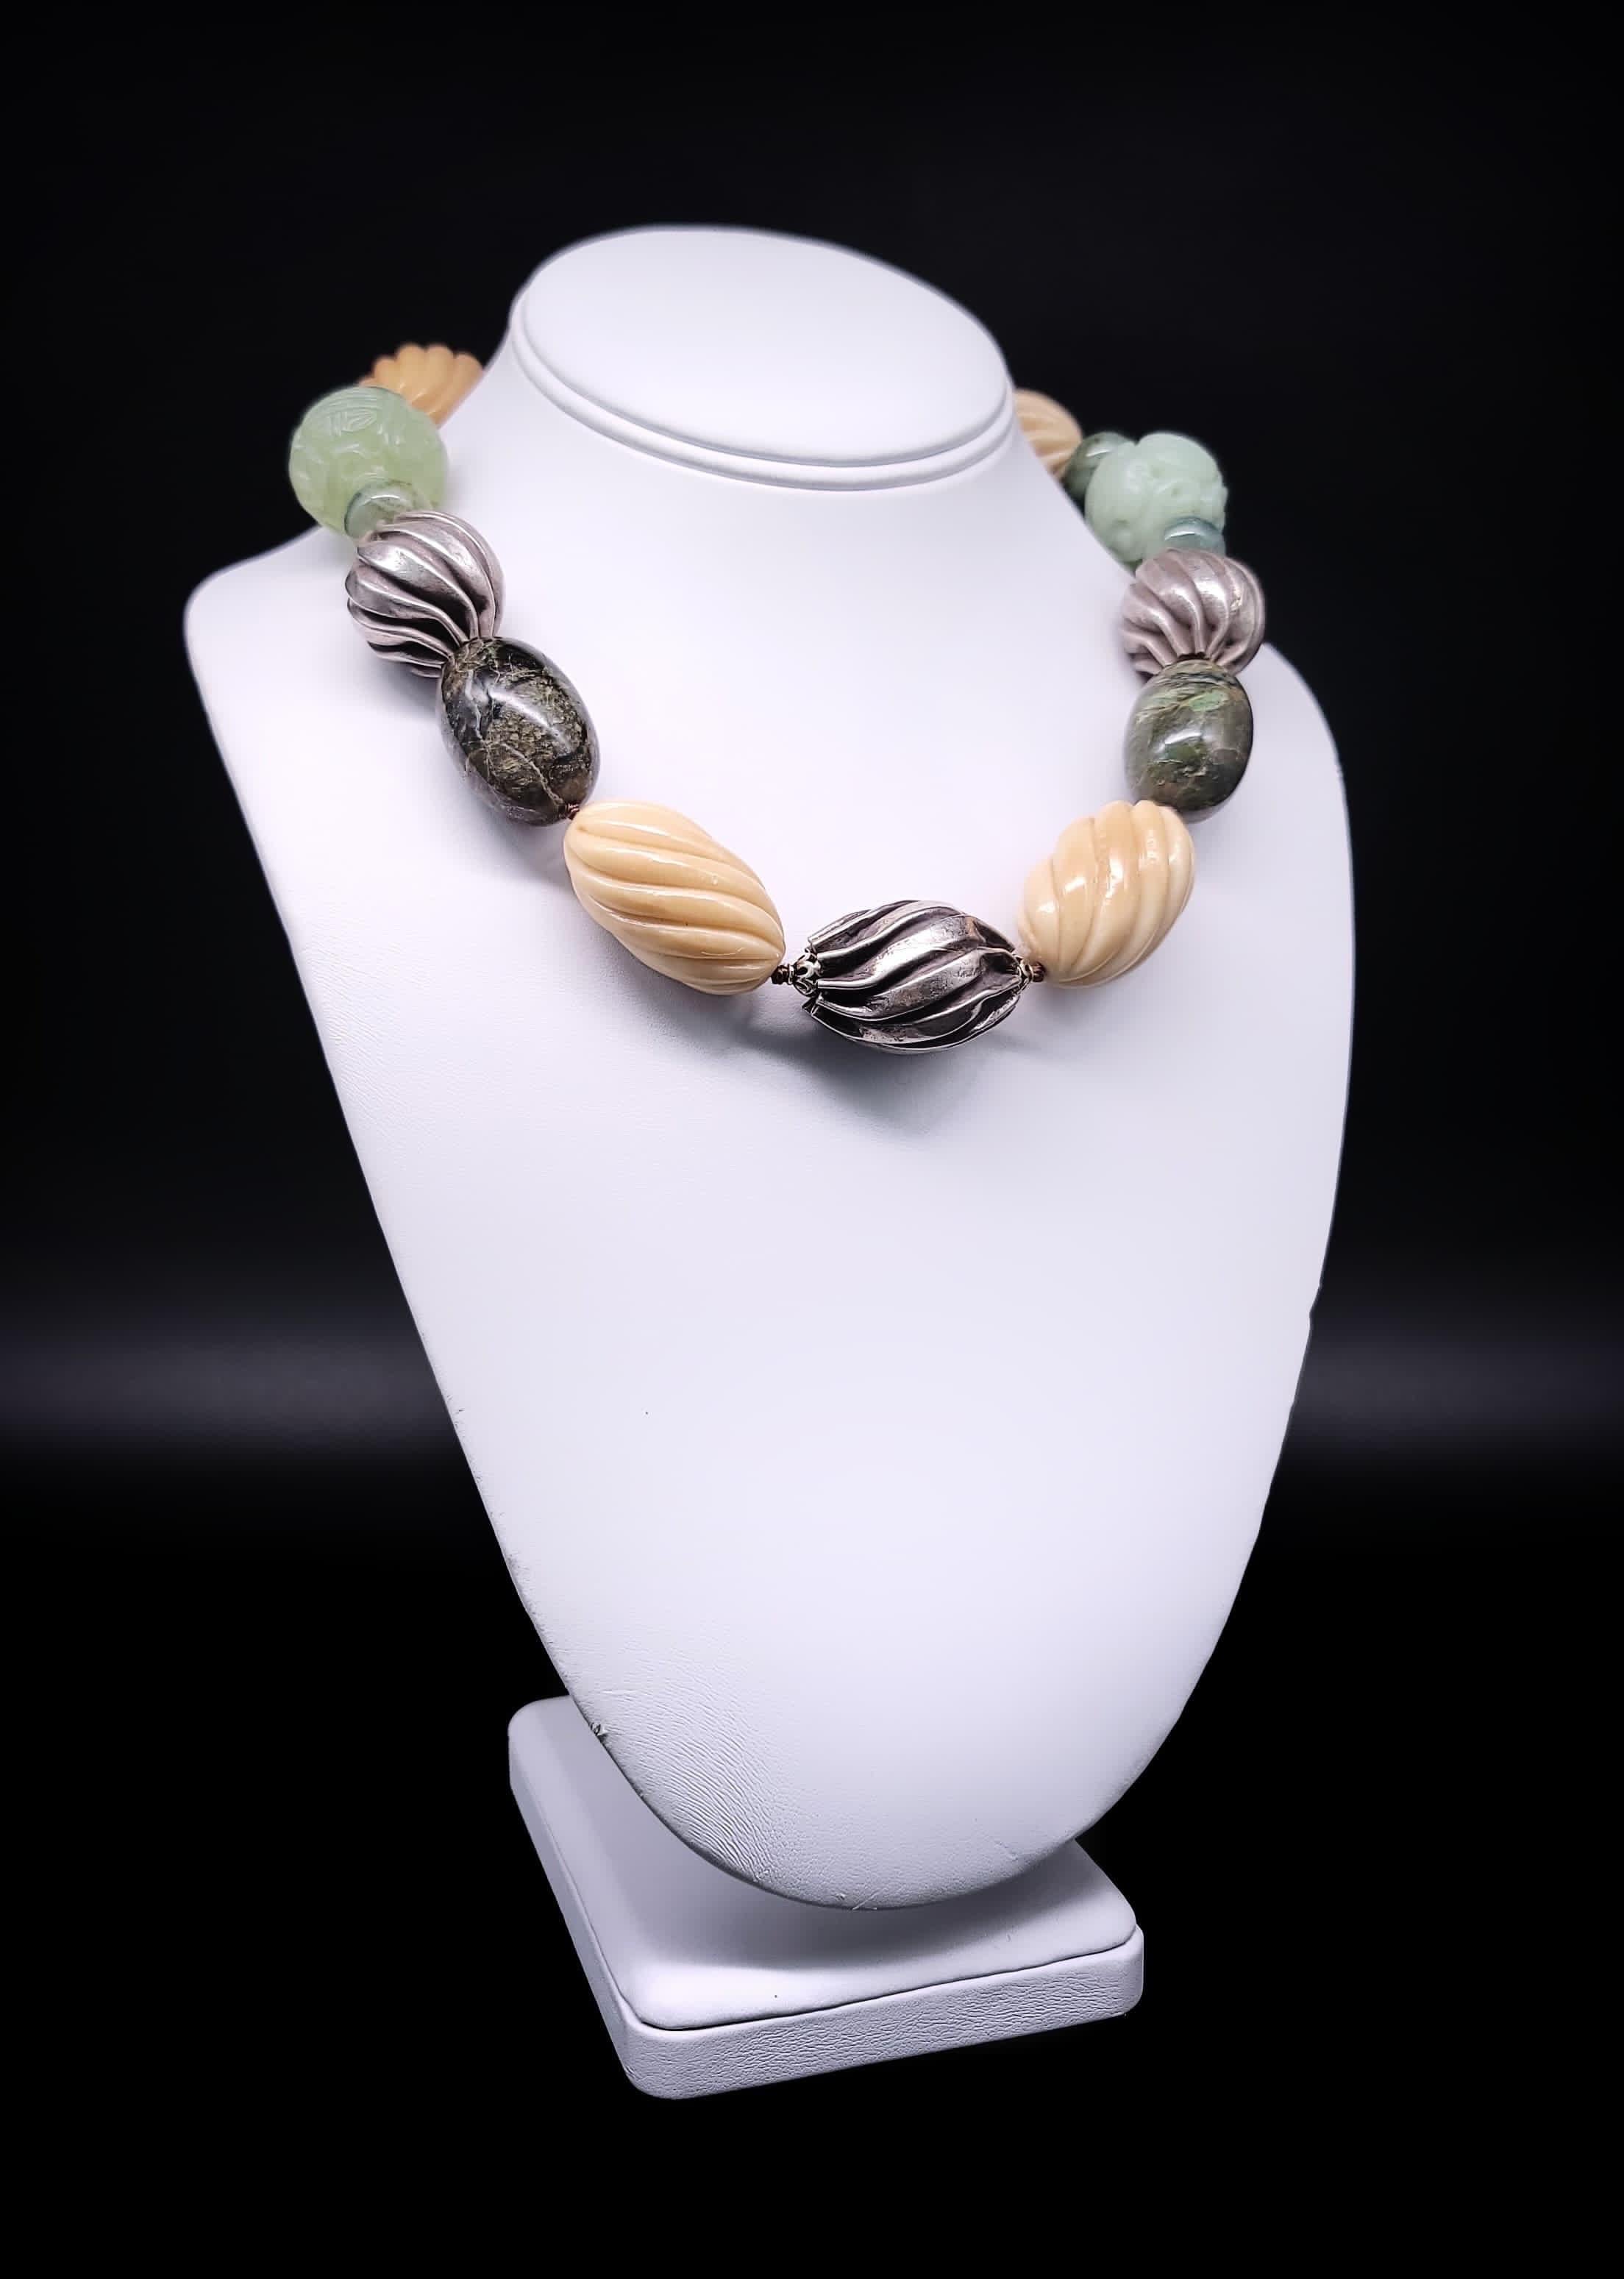 One-of-a-Kind

Experience the epitome of elegance with this exquisite necklace, crafted from polished Peruvian Opals, intricately carved green Jade longevity beads, and smaller jade spacers, all accentuated with delicately carved bone and adorned